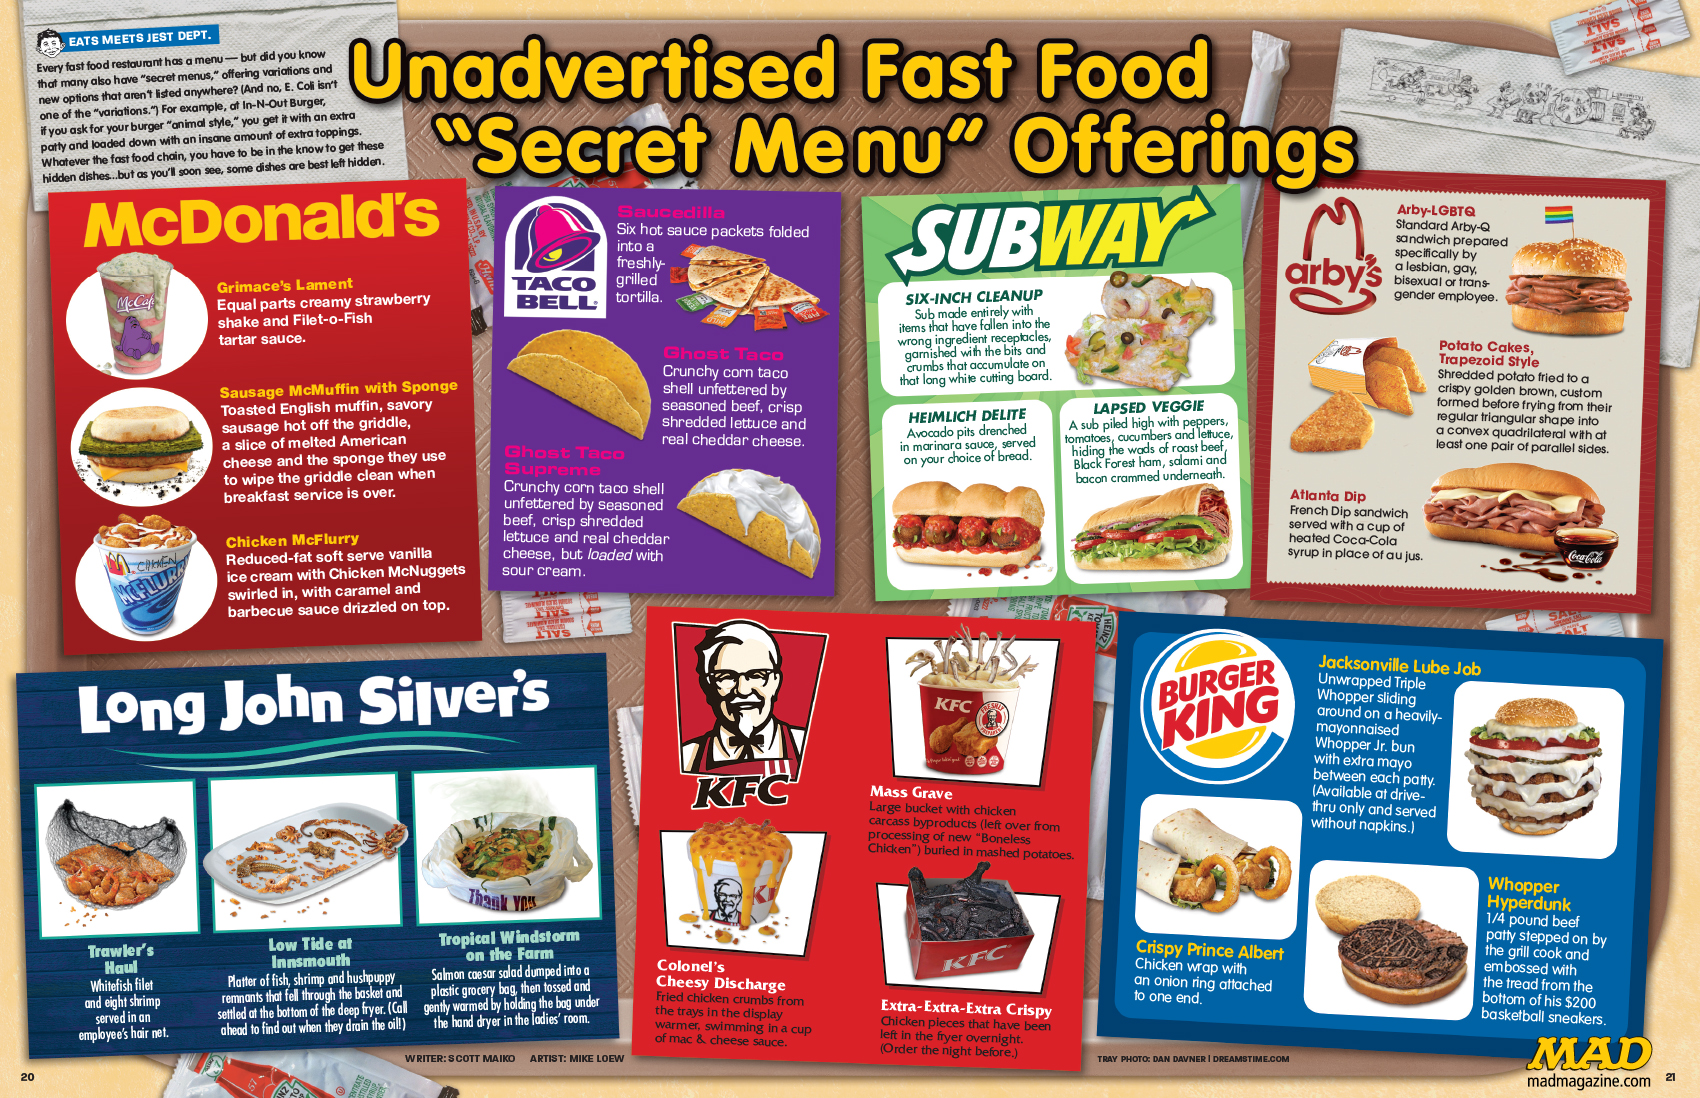 21 New Fast Food Secret Menu Items Uncovered (None Of ...